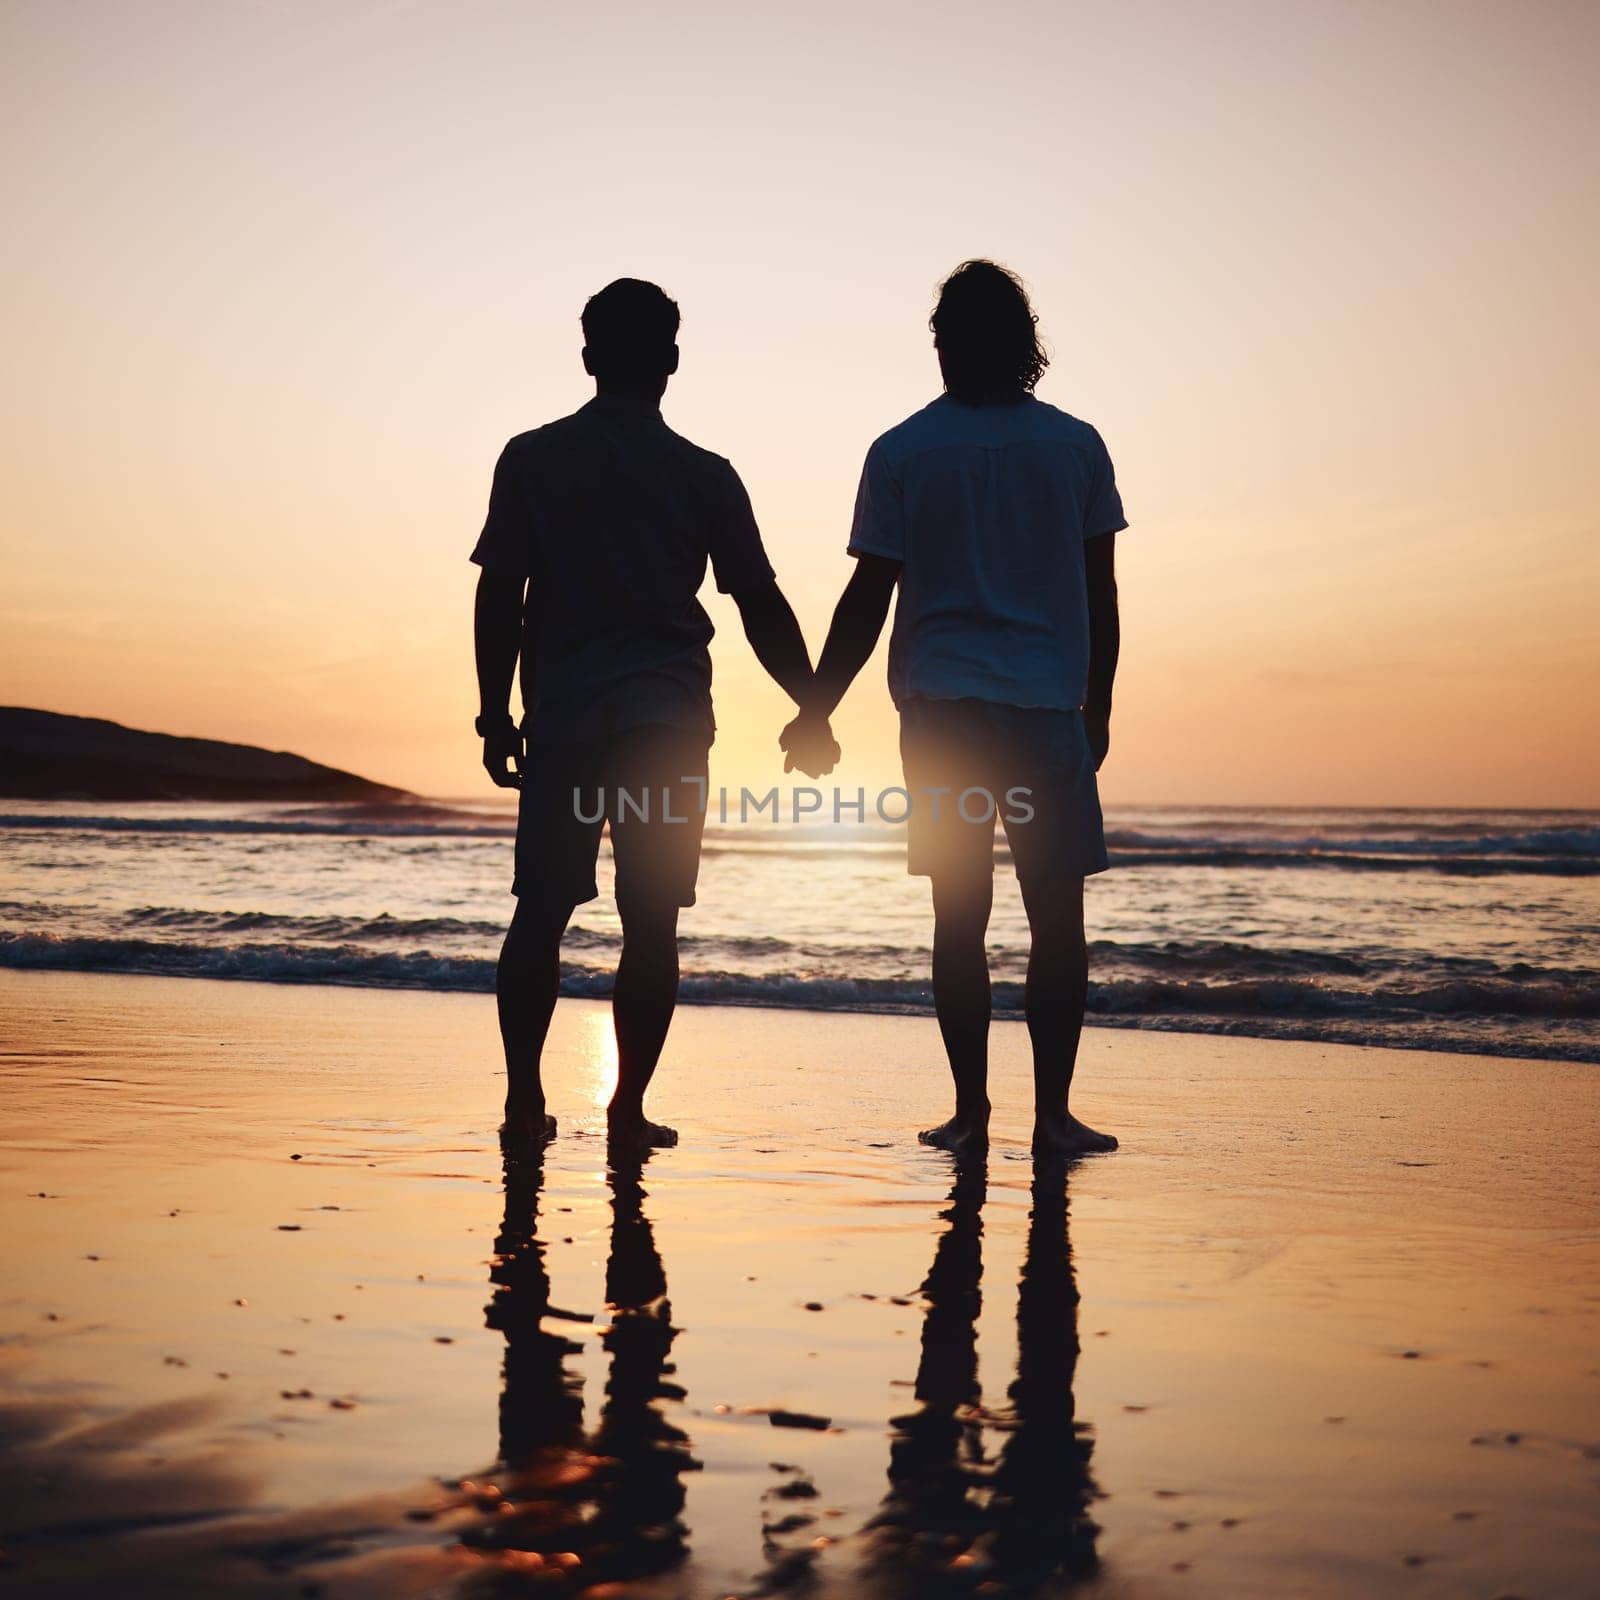 Silhouette, holding hands and gay couple on beach, sunset and shadow on summer vacation together in Thailand. Sunshine, ocean and romance, lgbt men in nature and fun holiday with pride, sea and waves.